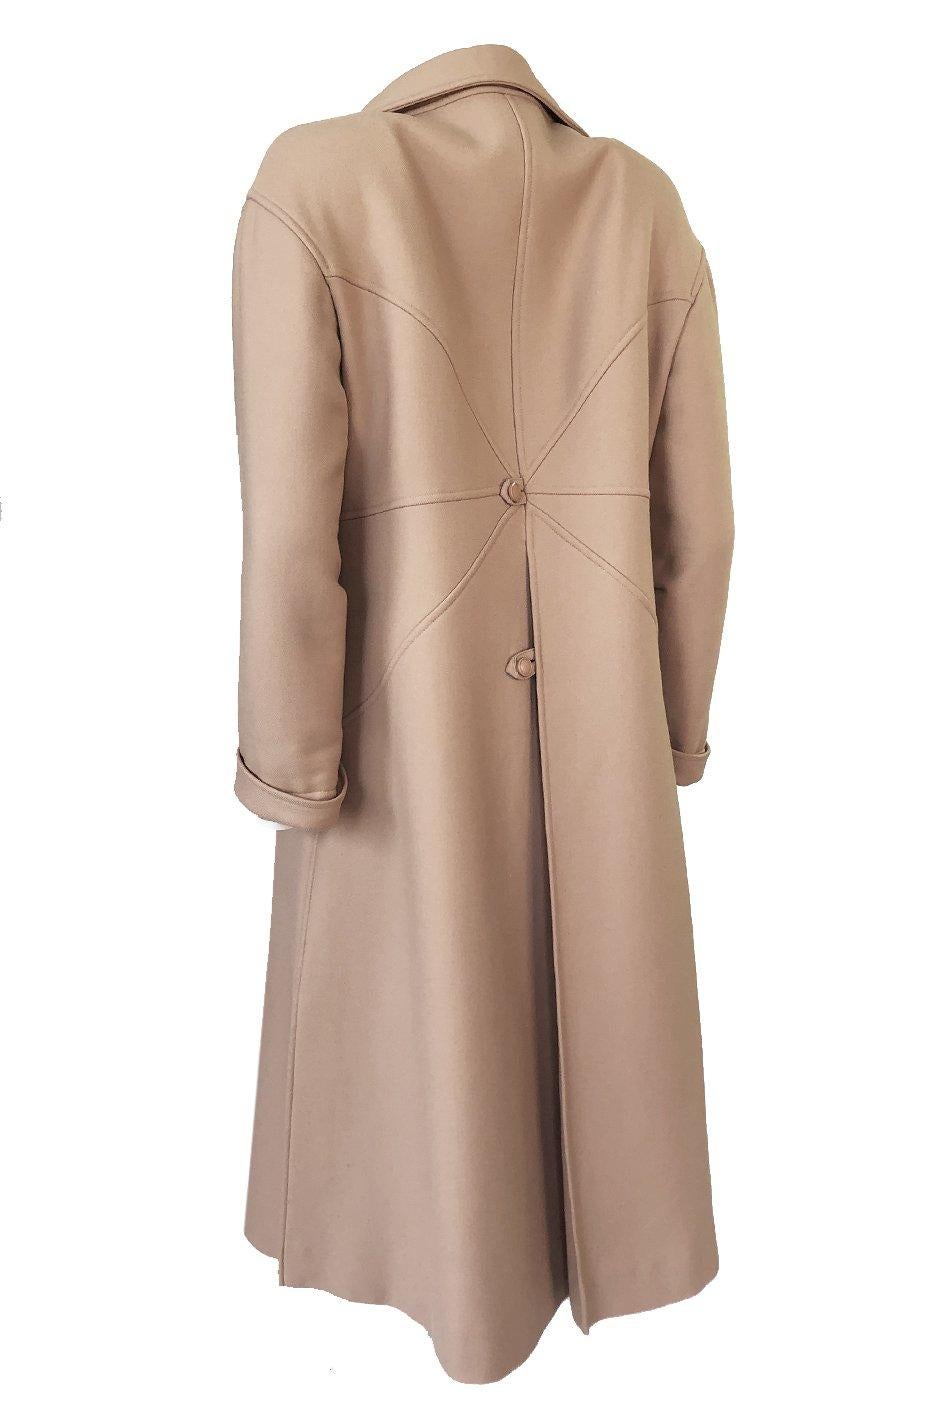 Women's Immaculate 1960s Courreges Unusually Seamed Camel Toggle Coat